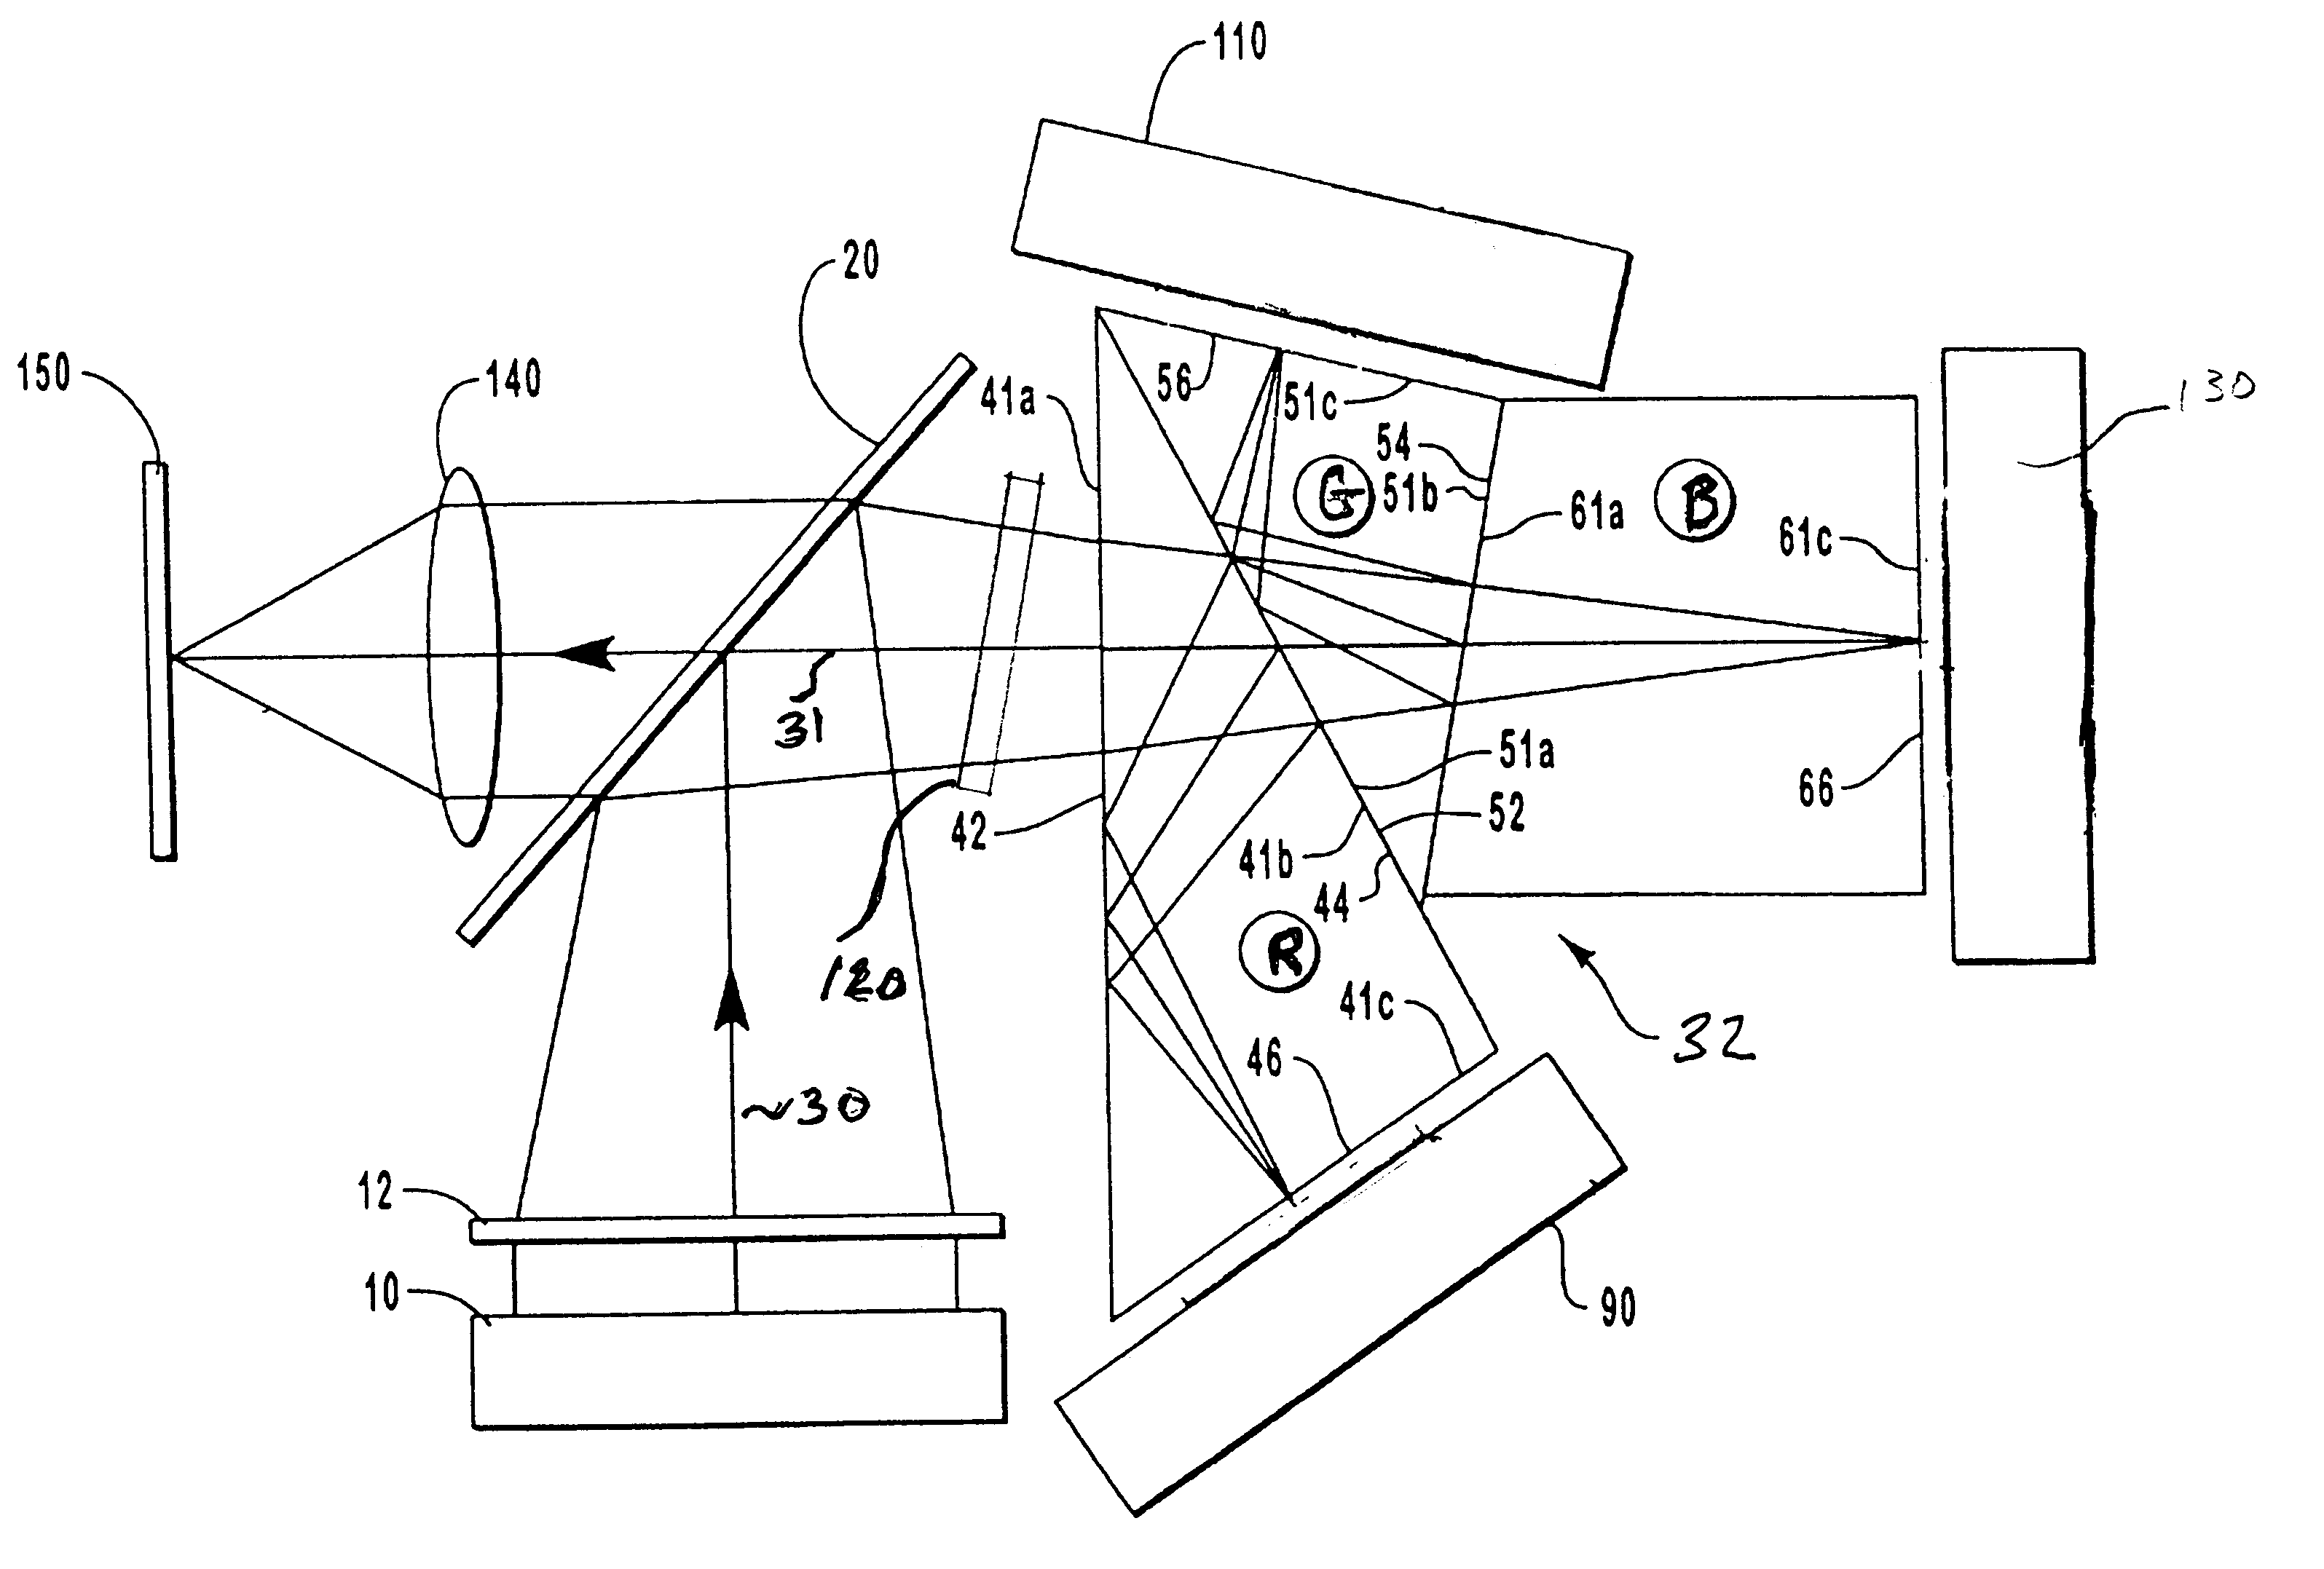 Method of using a retarder plate to improve contrast in a reflective imaging system